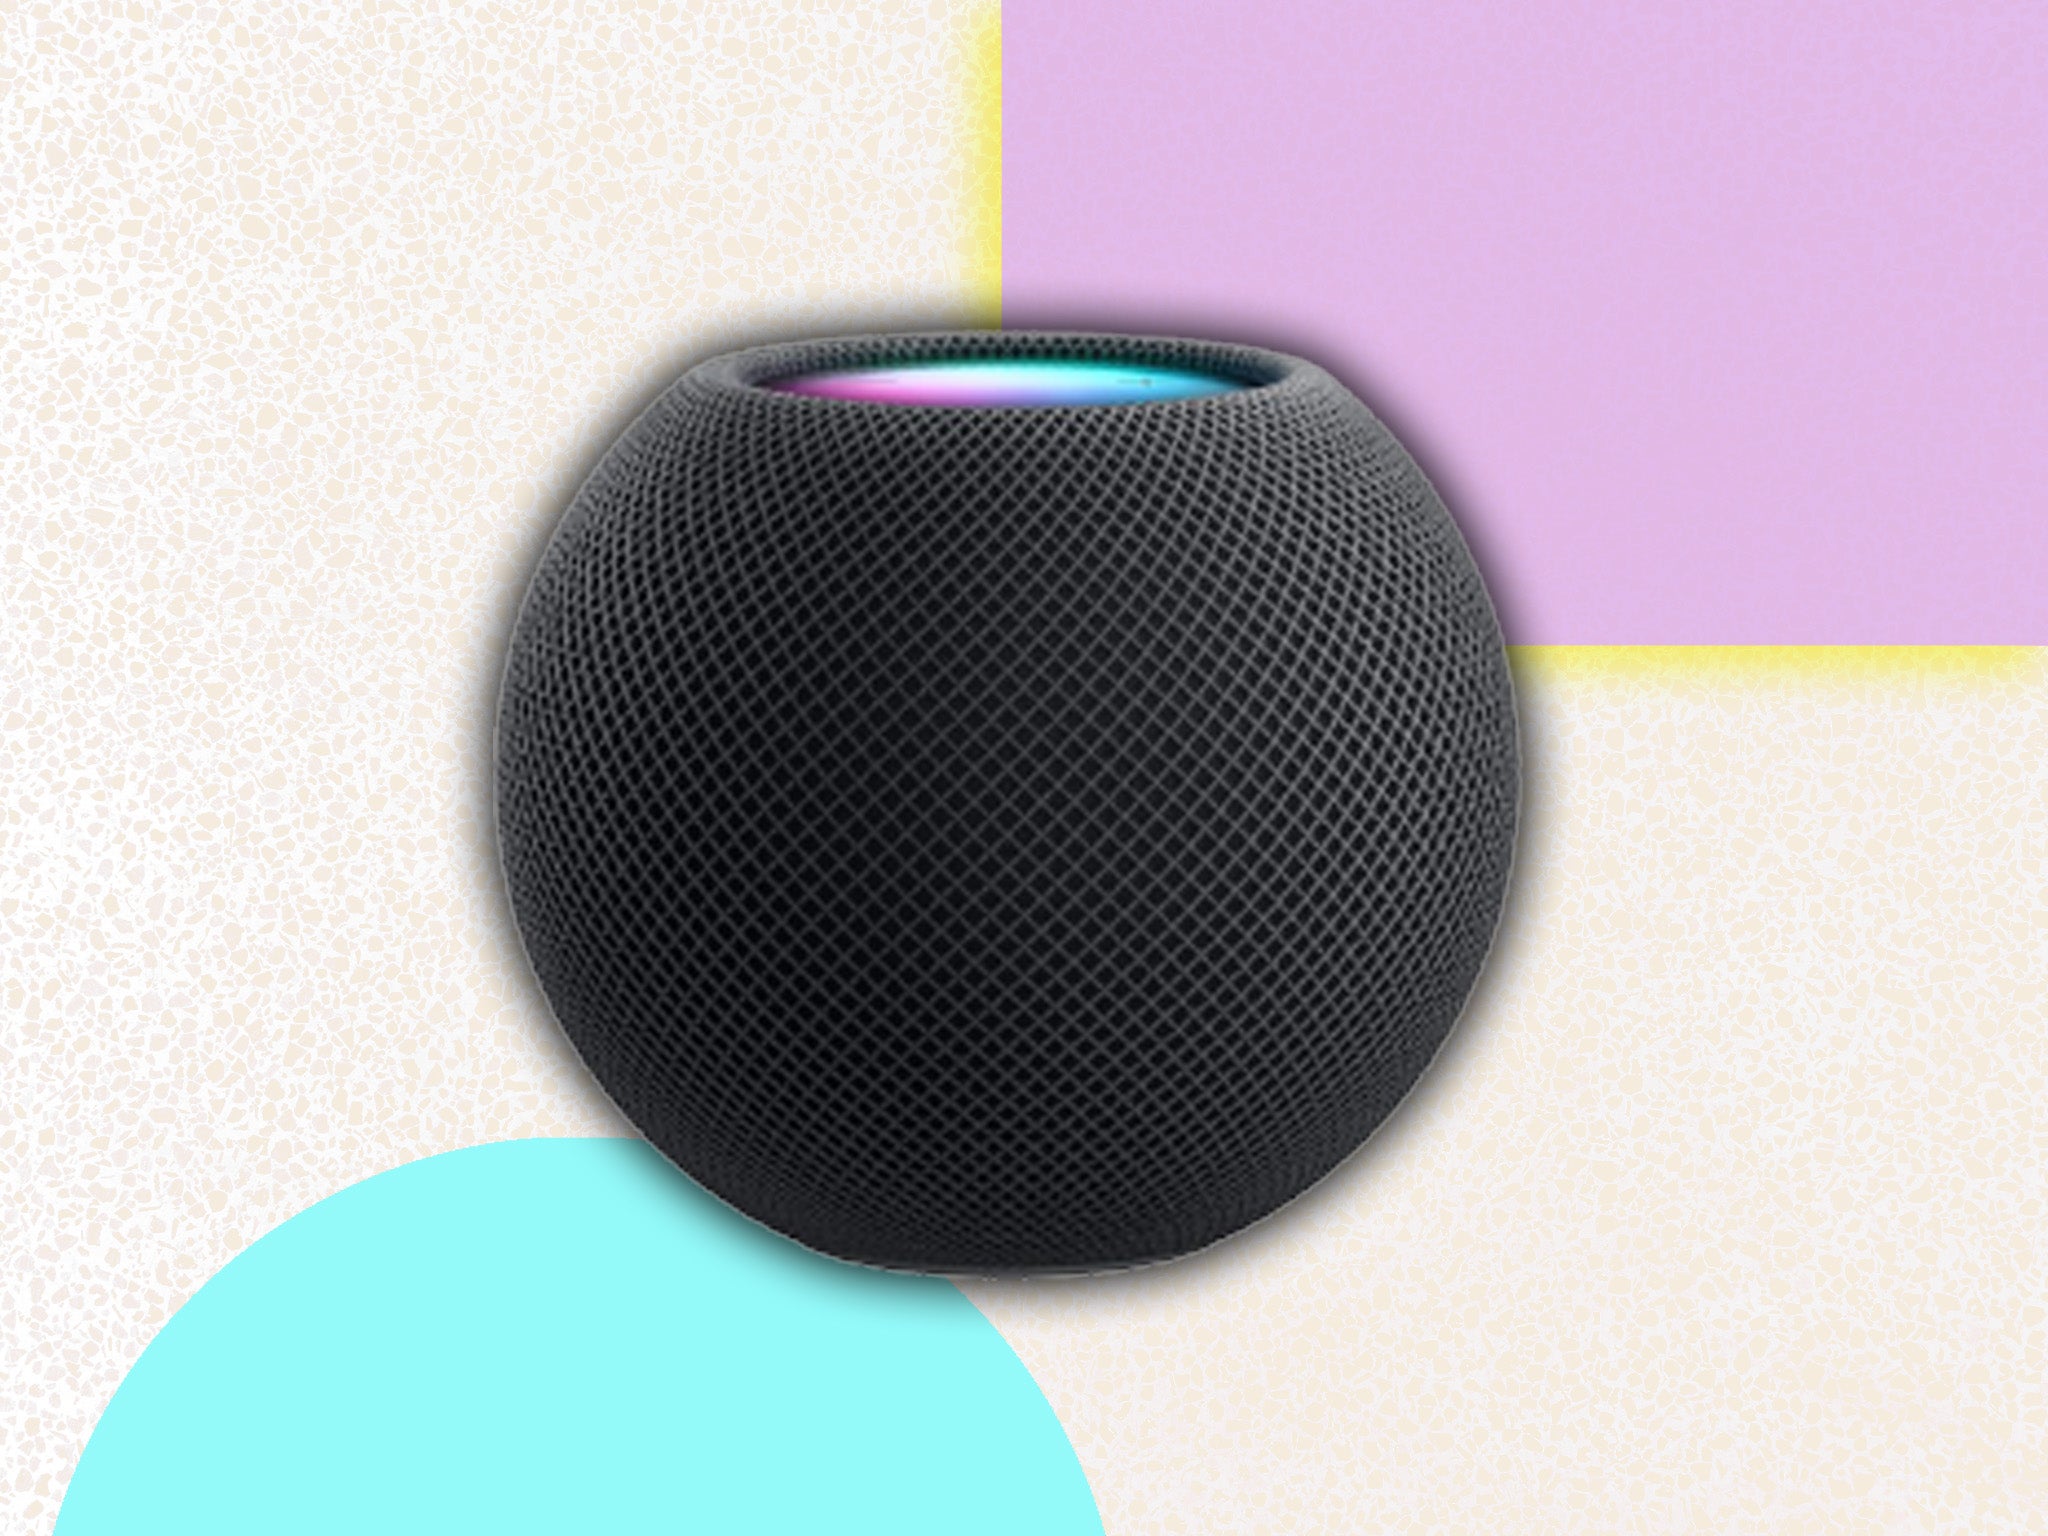 Apple’s original homepod never managed to fully take off, but the new mini is here to impress